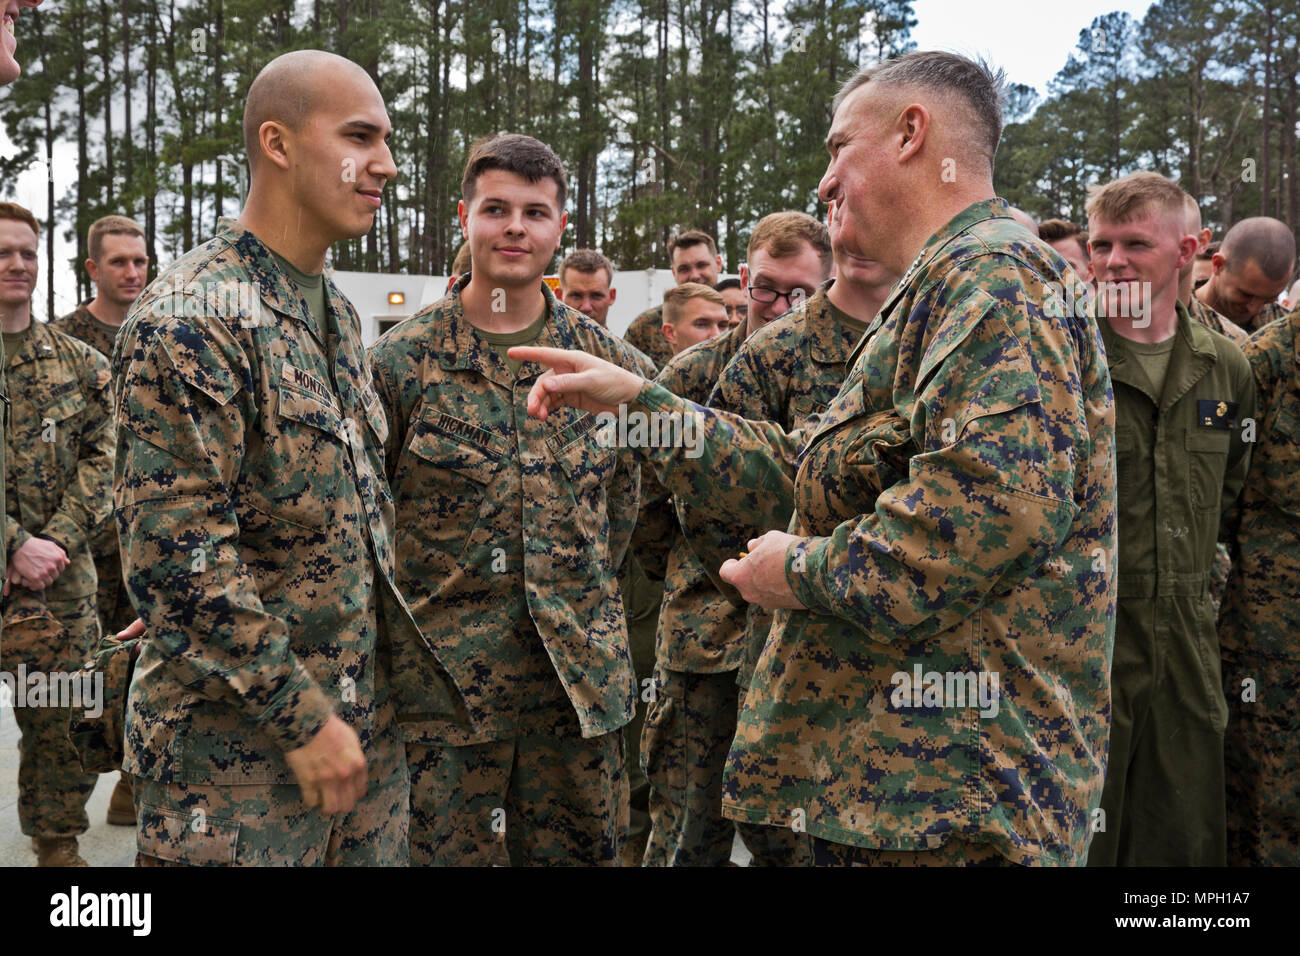 U.S. Marine Corps Gen. Glenn M. Walters, right, 34th assistant commandant of the Marine Corps, speaks with Lance Cpl. Drake Monzon, data technician, Marine Unmanned Aerial Vehicle Squadron 2 (VMU-2), Jacksonville, Cherry Point, N.C., Feb. 24, 2017. Walters spoke to the Marines about present and future missions, initiatives, and plans for the Marine Corps. (U.S. Marine Corps photo by Lance Cpl. Hailey D. Clay) Stock Photo